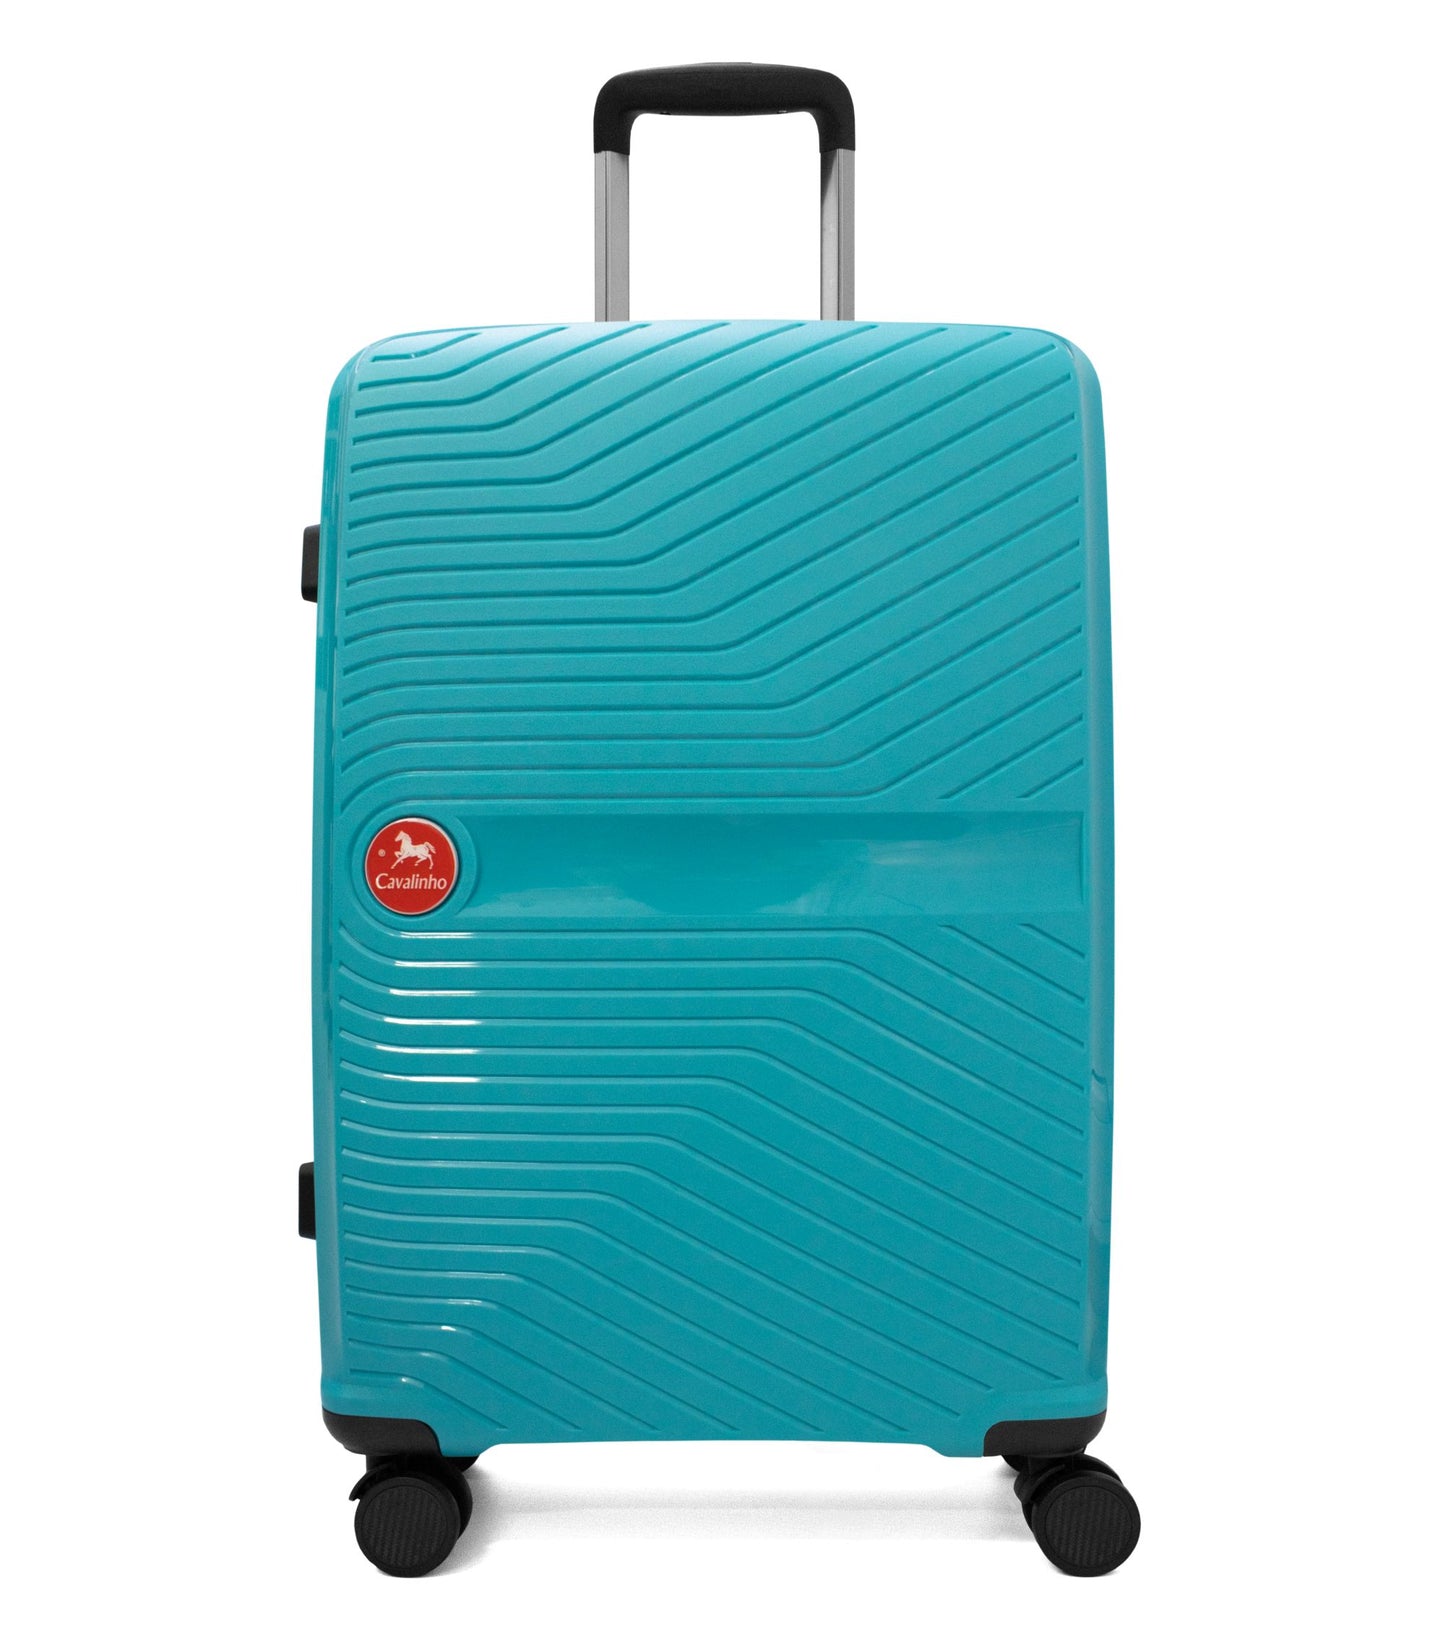 #color_ 24 inch DarkTurquoise | Cavalinho Colorful Check-in Hardside Luggage (24") - 24 inch DarkTurquoise - 68020004.25.24_1